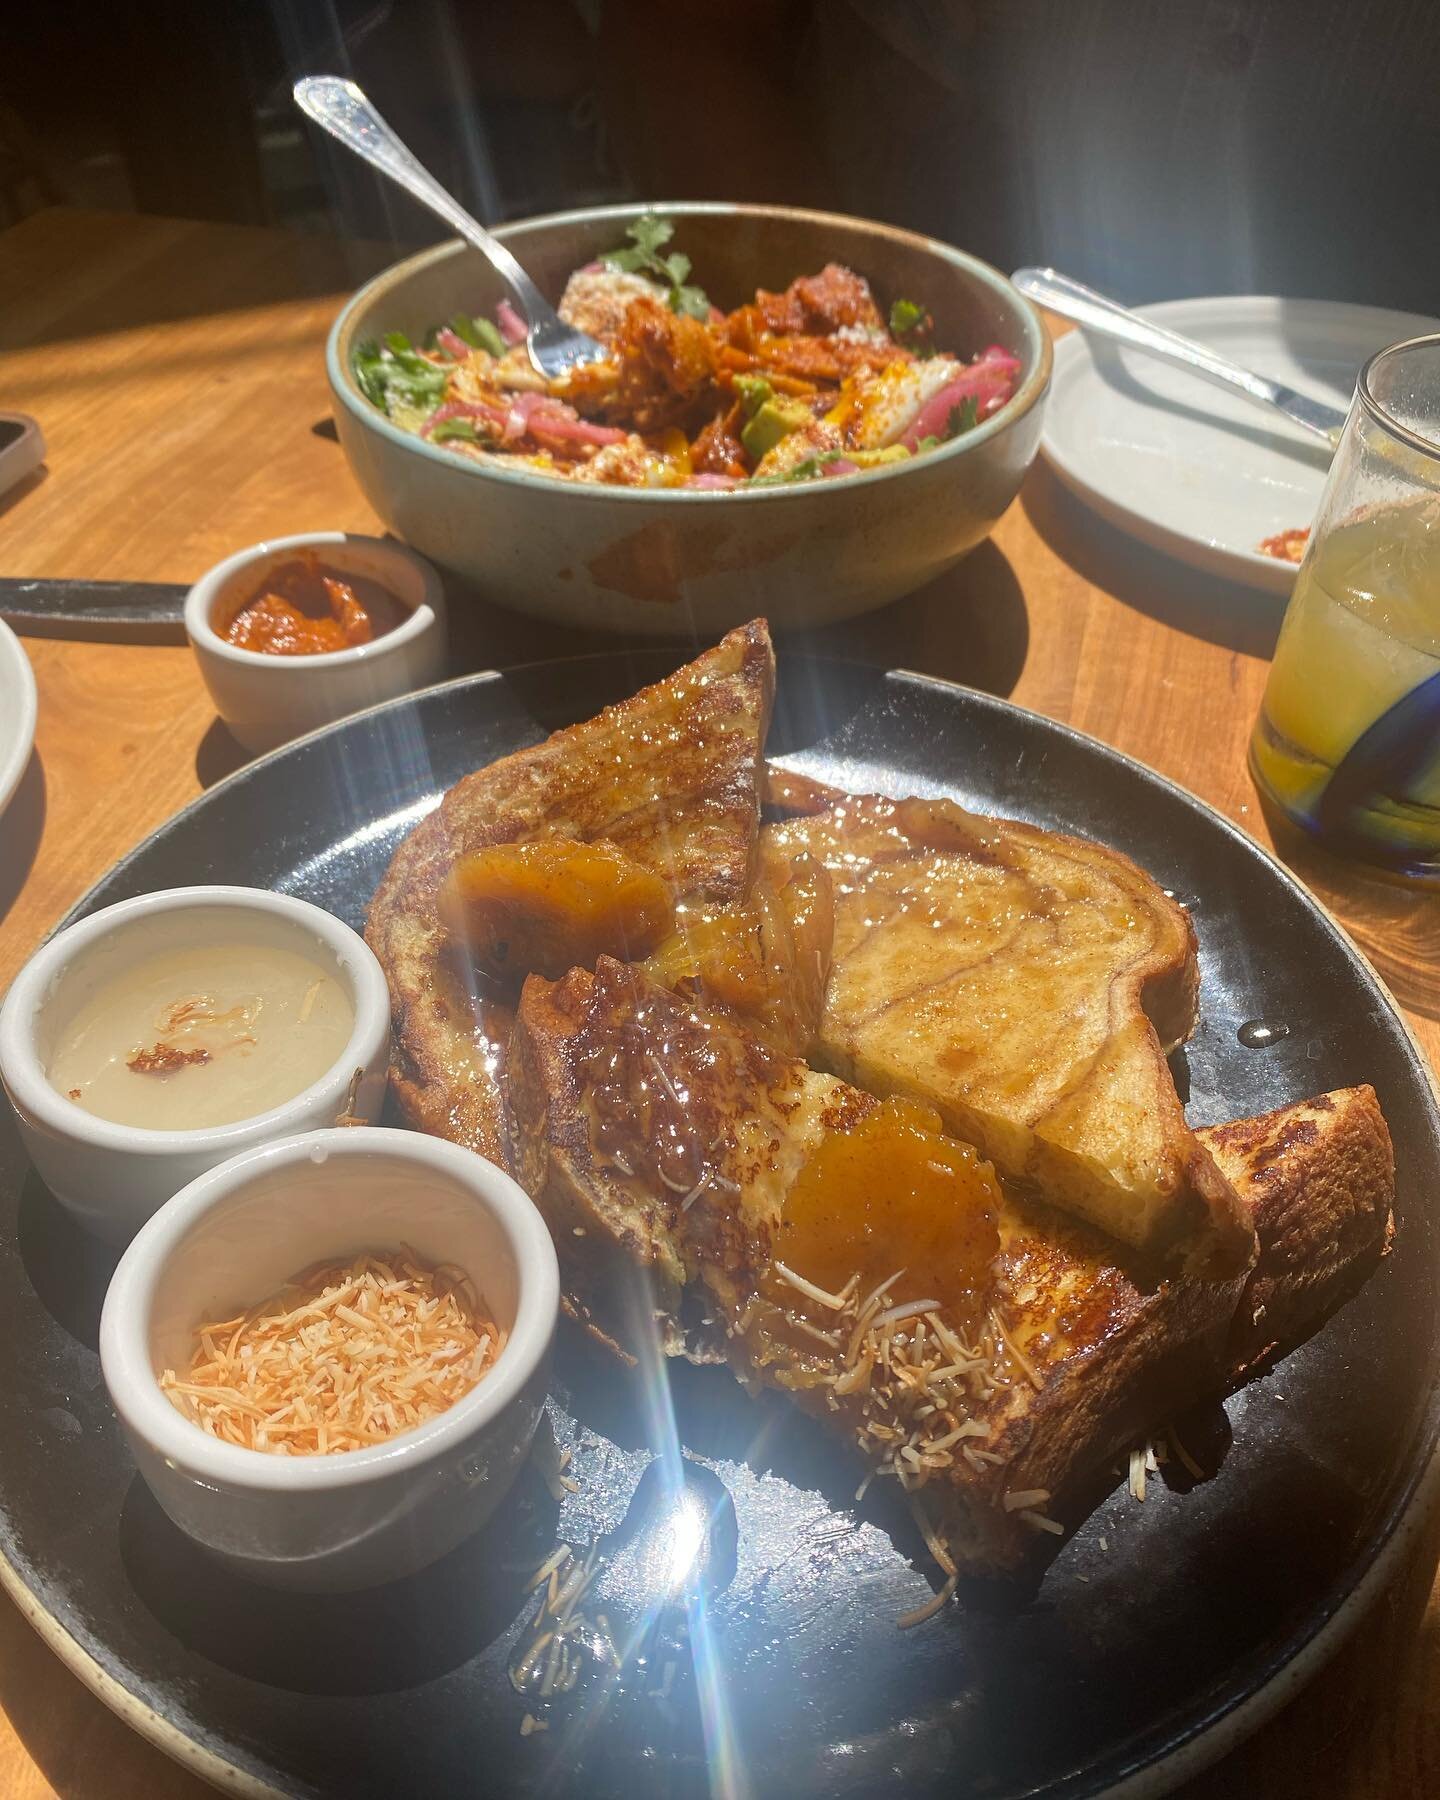 I&rsquo;ve died and gone to Heaven! Brioche Coconut French Toast and Chilaquiles. Happy Mother&rsquo;sDay!

#bottledsoul #scentedcandles #recycledbottlecandles 
#recycledbottles 
#womenowned
#bottledsoul
#Alcoholbottlecandles
#repurposed #modernmaker